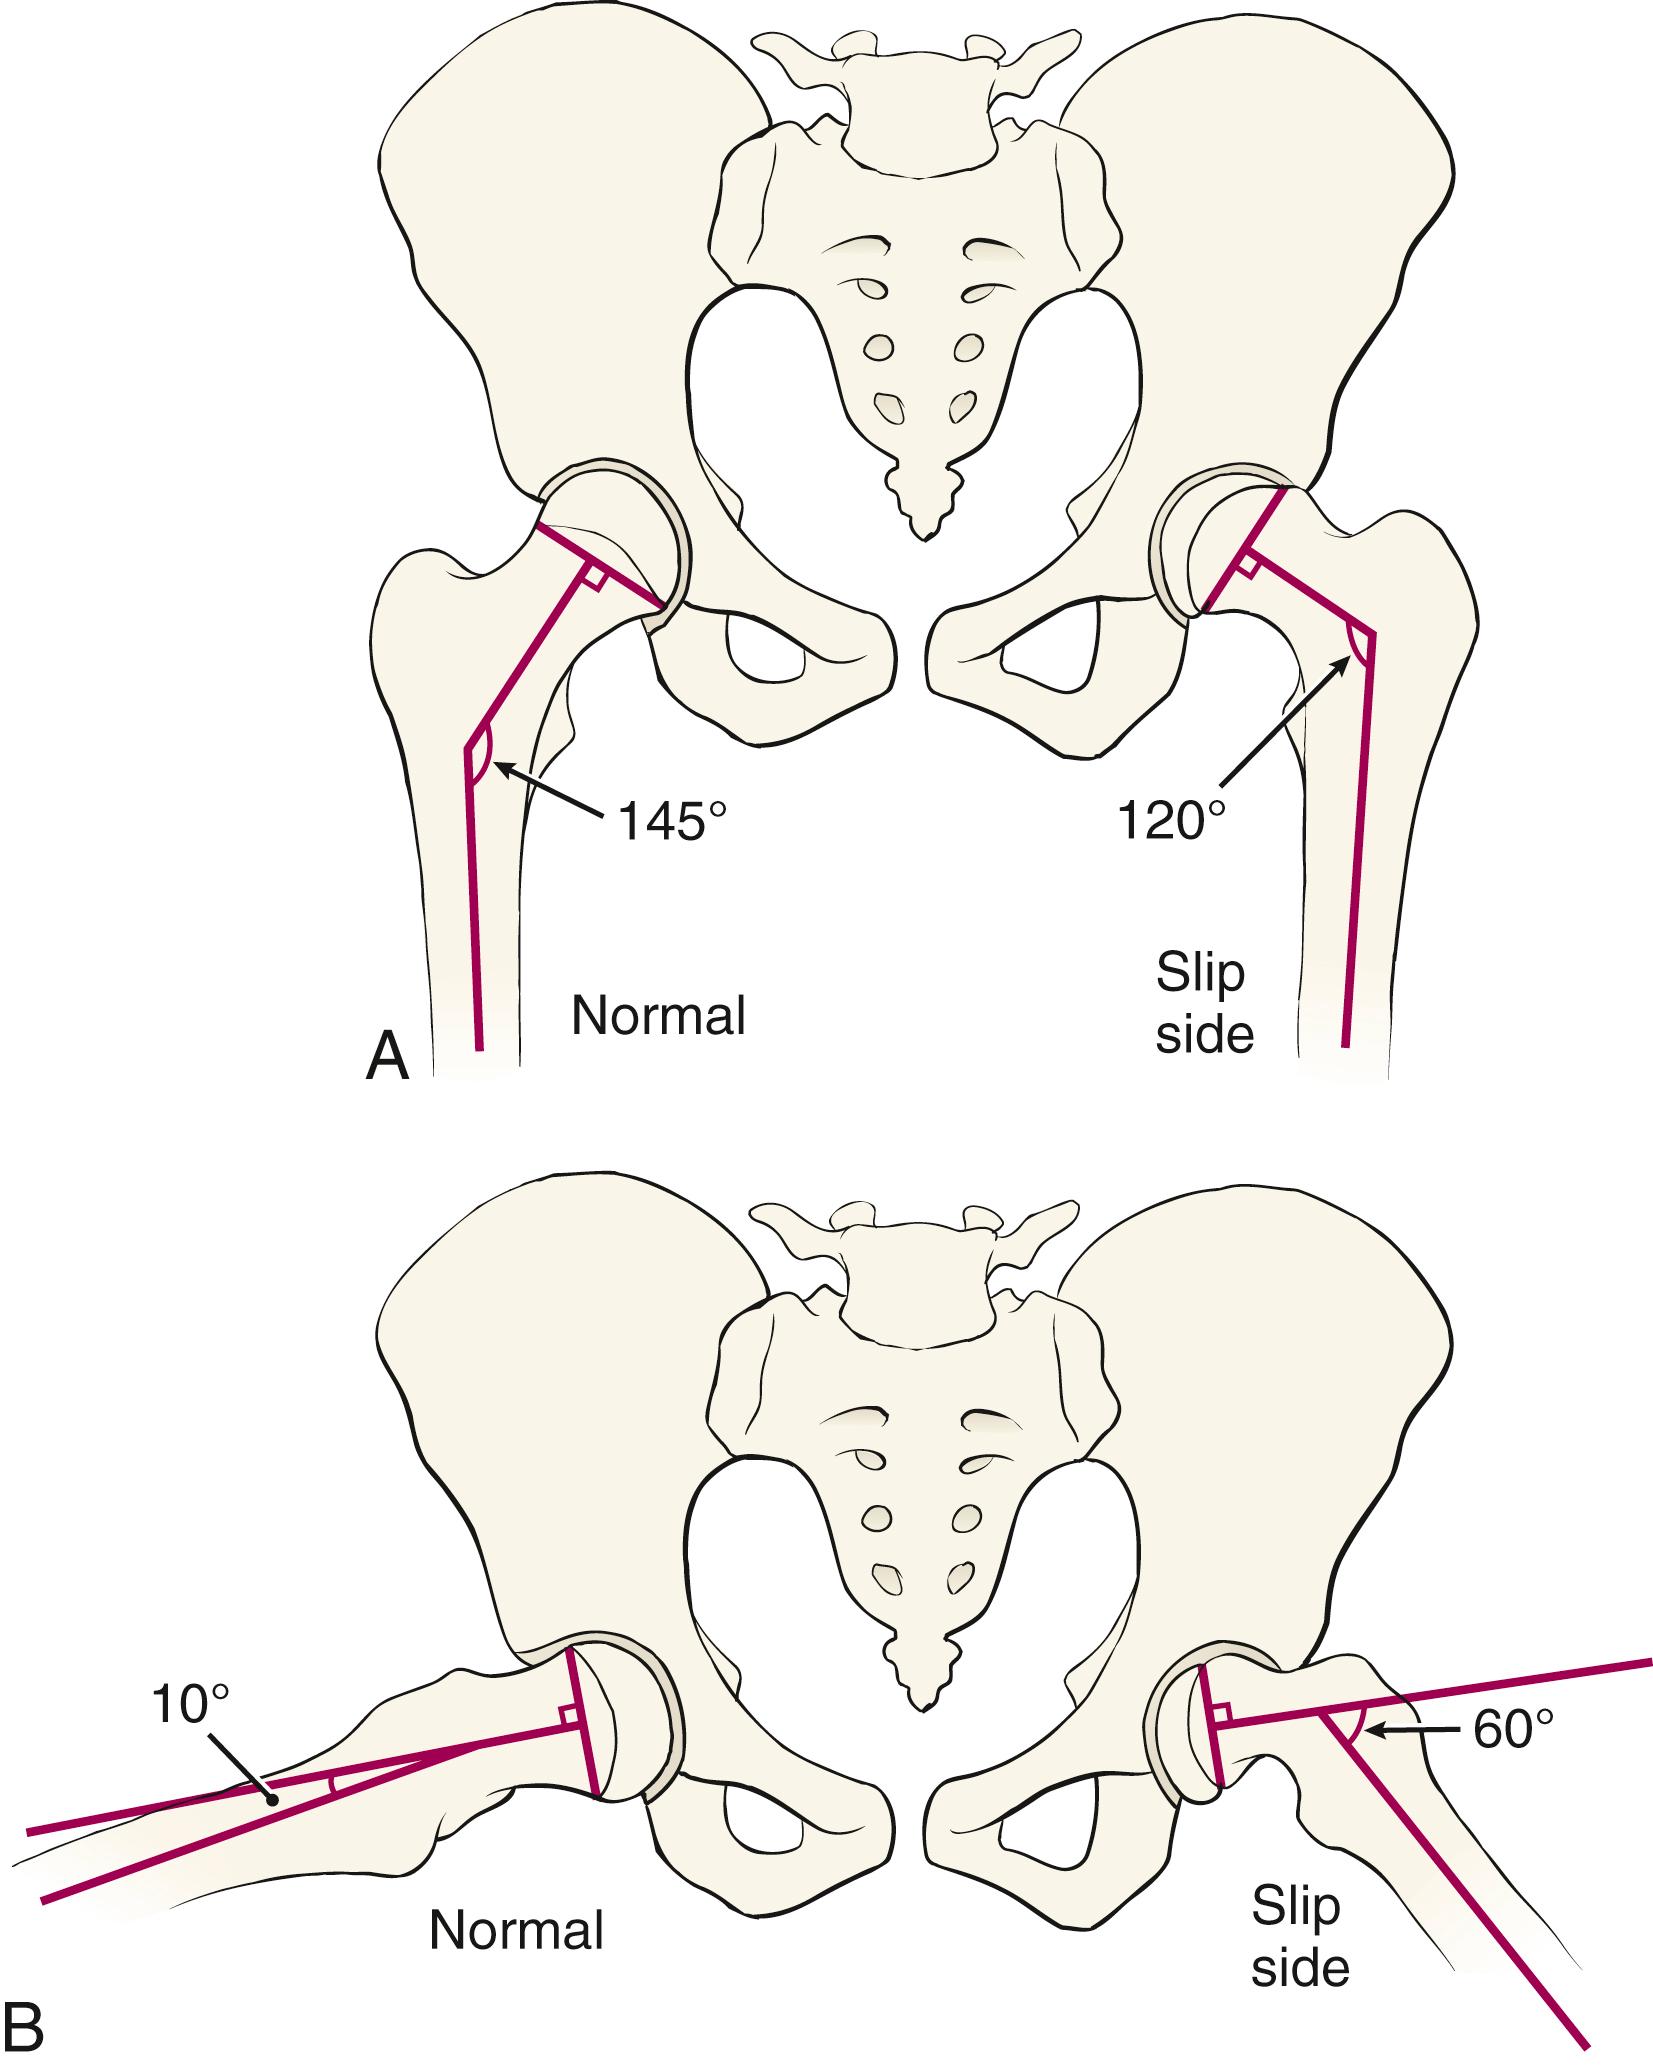 FIG. 15.2, Southwick method of measuring the head-shaft angle to assess the severity of slipped capital femoral epiphysis. (A) Lines are drawn corresponding to the axis of the femoral shaft and the base of the capital femoral epiphysis. The head-shaft angle is the angle between the axis of the femoral shaft and is perpendicular to the base of the epiphysis. Normally this angle is 145 degrees. (B) Similar lines may be drawn on the frog-leg lateral radiographs. Mild slips have less than 30 degrees of displacement, moderate slips have 30 to 60 degrees of displacement, and severe slips have more than 60 degrees of displacement compared with the contralateral normal side.